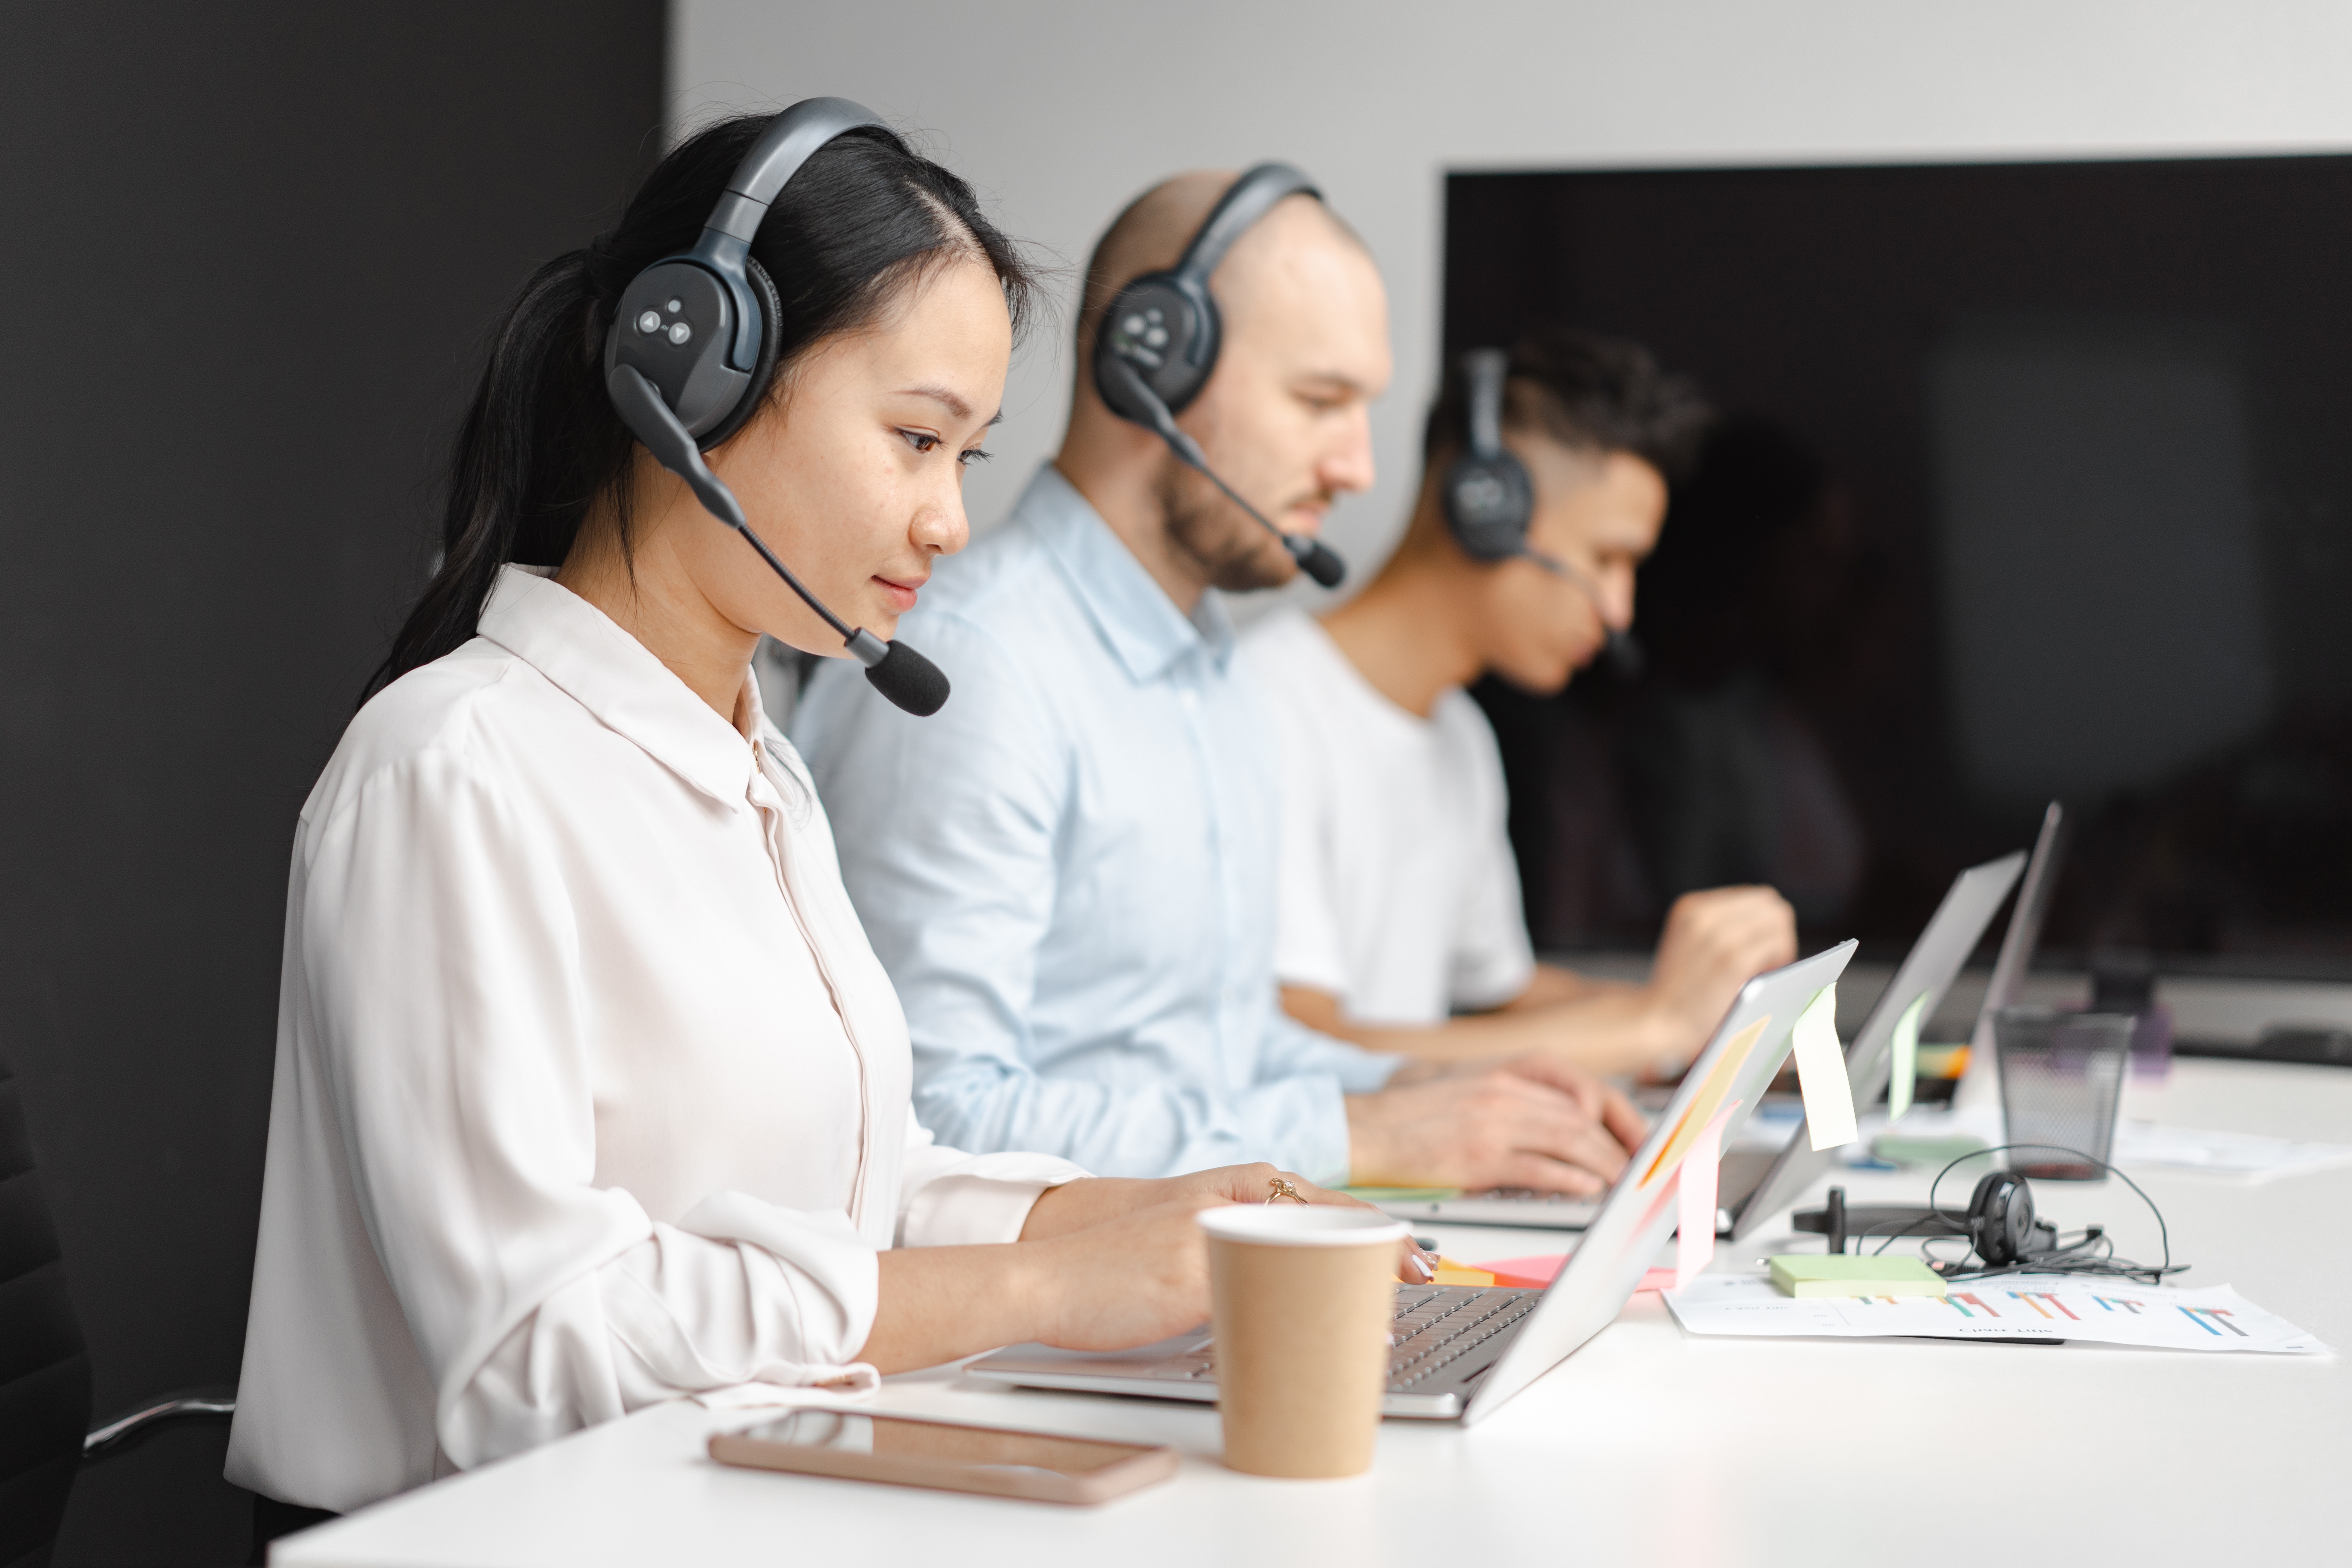 Why businesses should seriously consider outsourcing telemarketing?